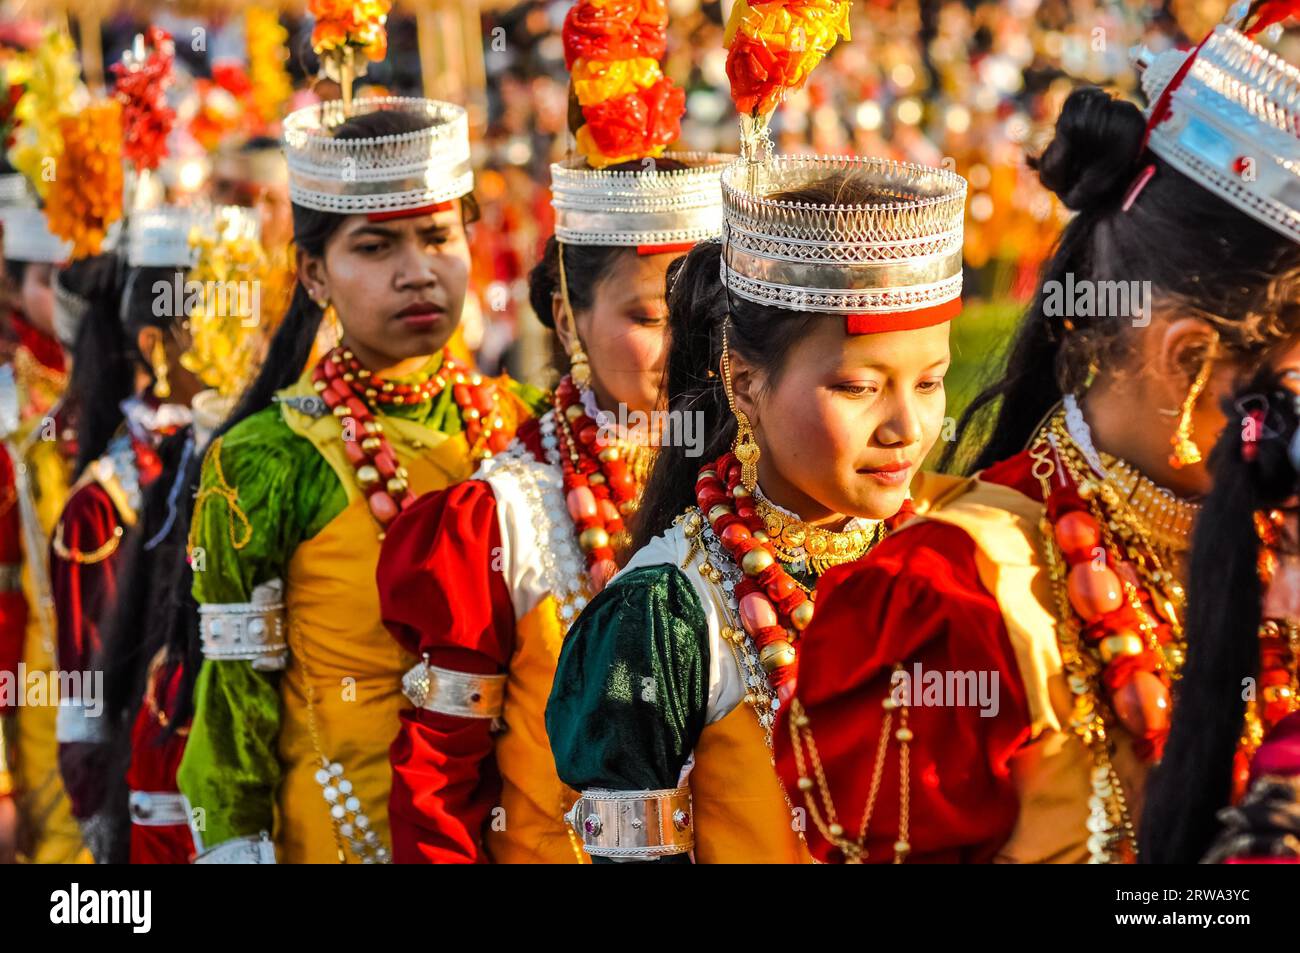 Shillong, Meghalaya, circa April 2012: Young girls wear traditional colourful costumes with large necklaces during Shad Suk Mynsiem Festival in Stock Photo